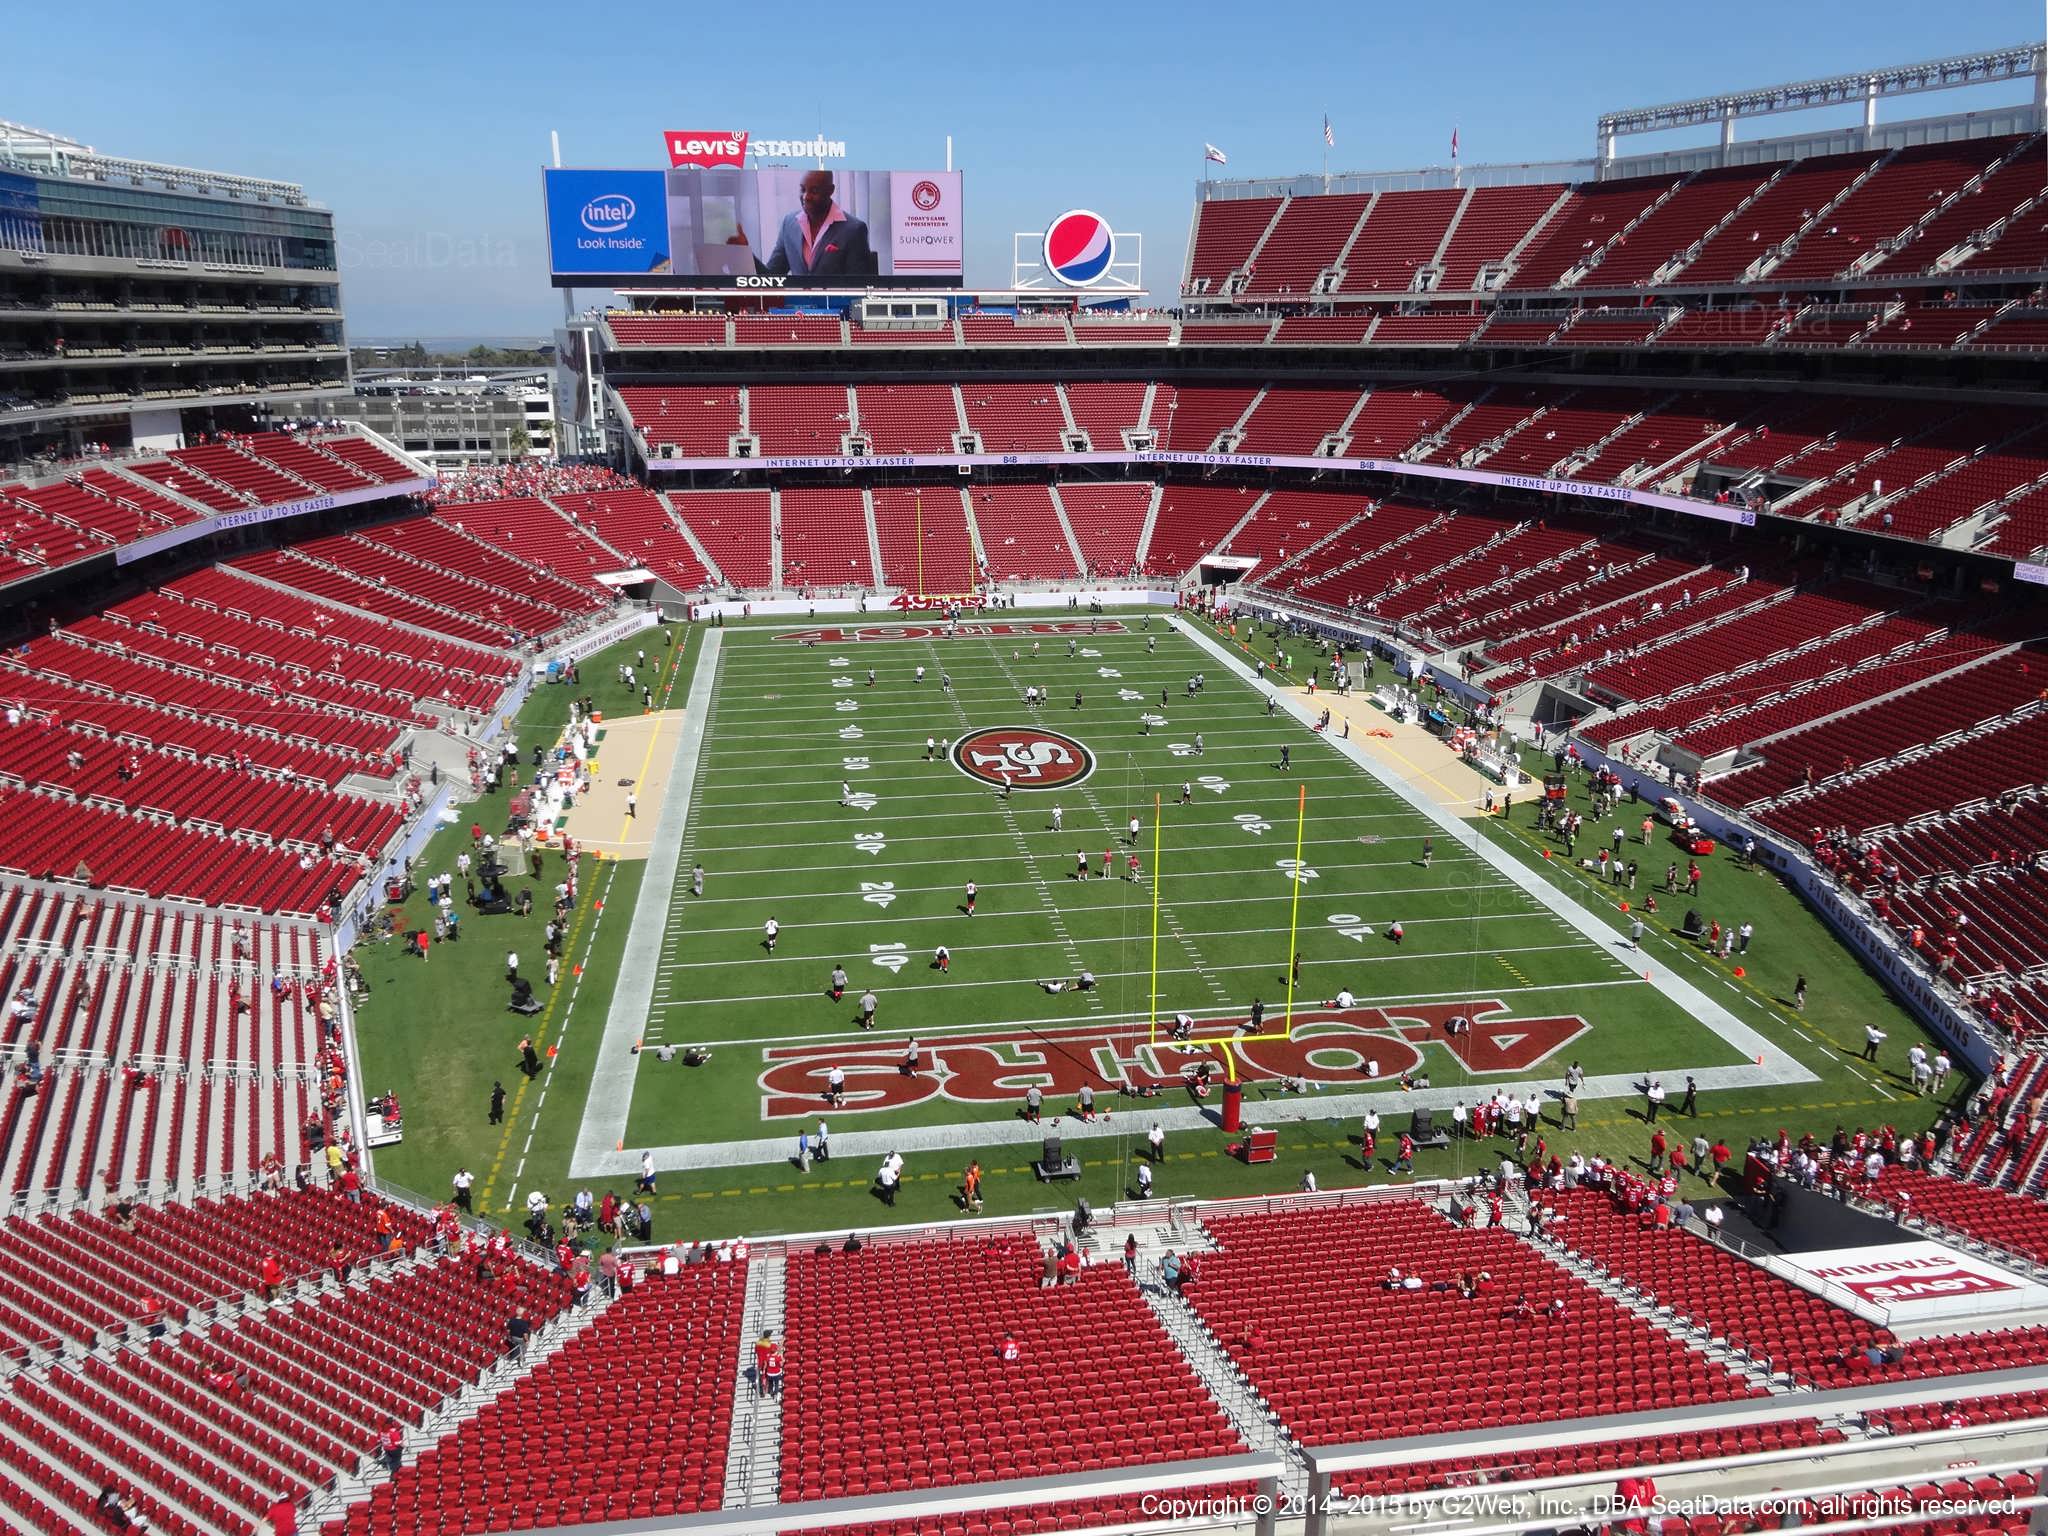 Seat view from section 327 at Levi’s Stadium, home of the San Francisco 49ers